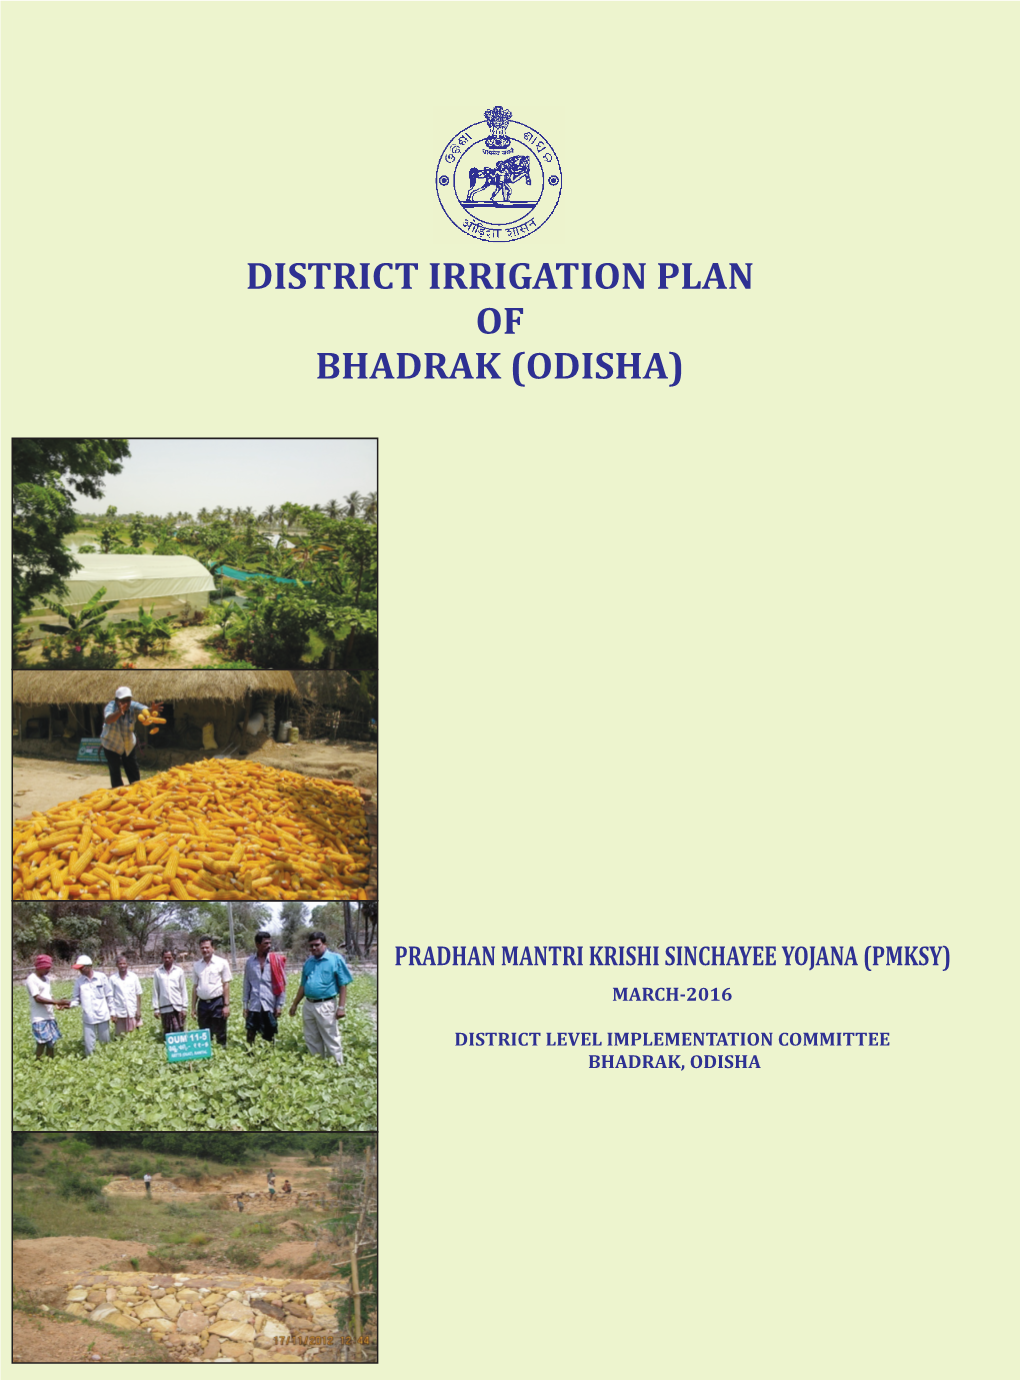 Existing Type of Irrigation in Bhadrak District Area